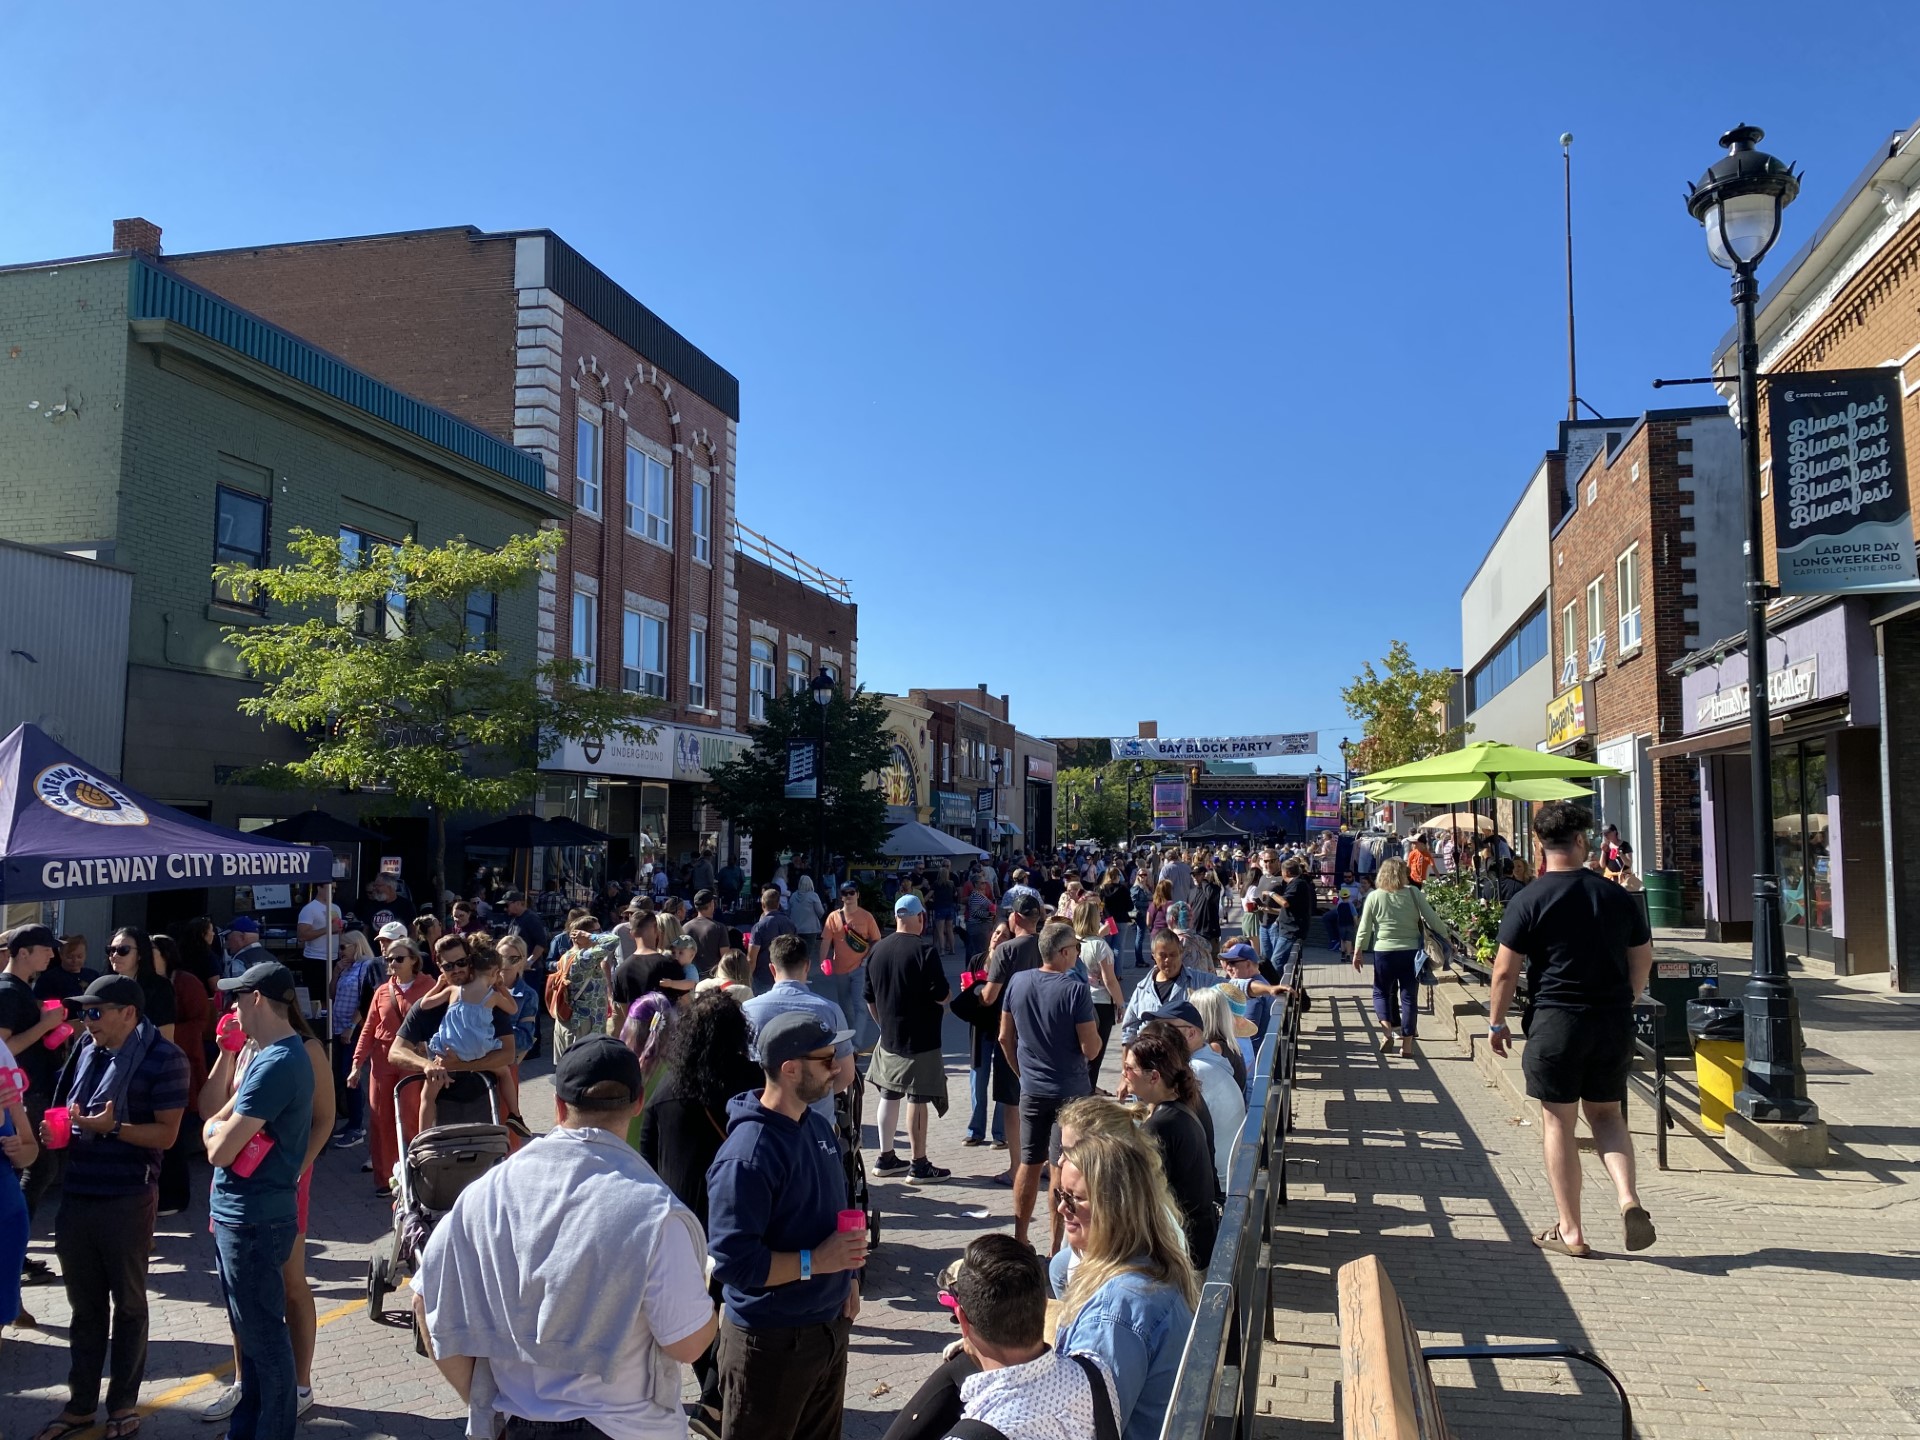 A large crowd of people standing, walking and talking in a North Bay street at the annual Bay Block Party event. The day is sunny and the sky is a vibrant blue.